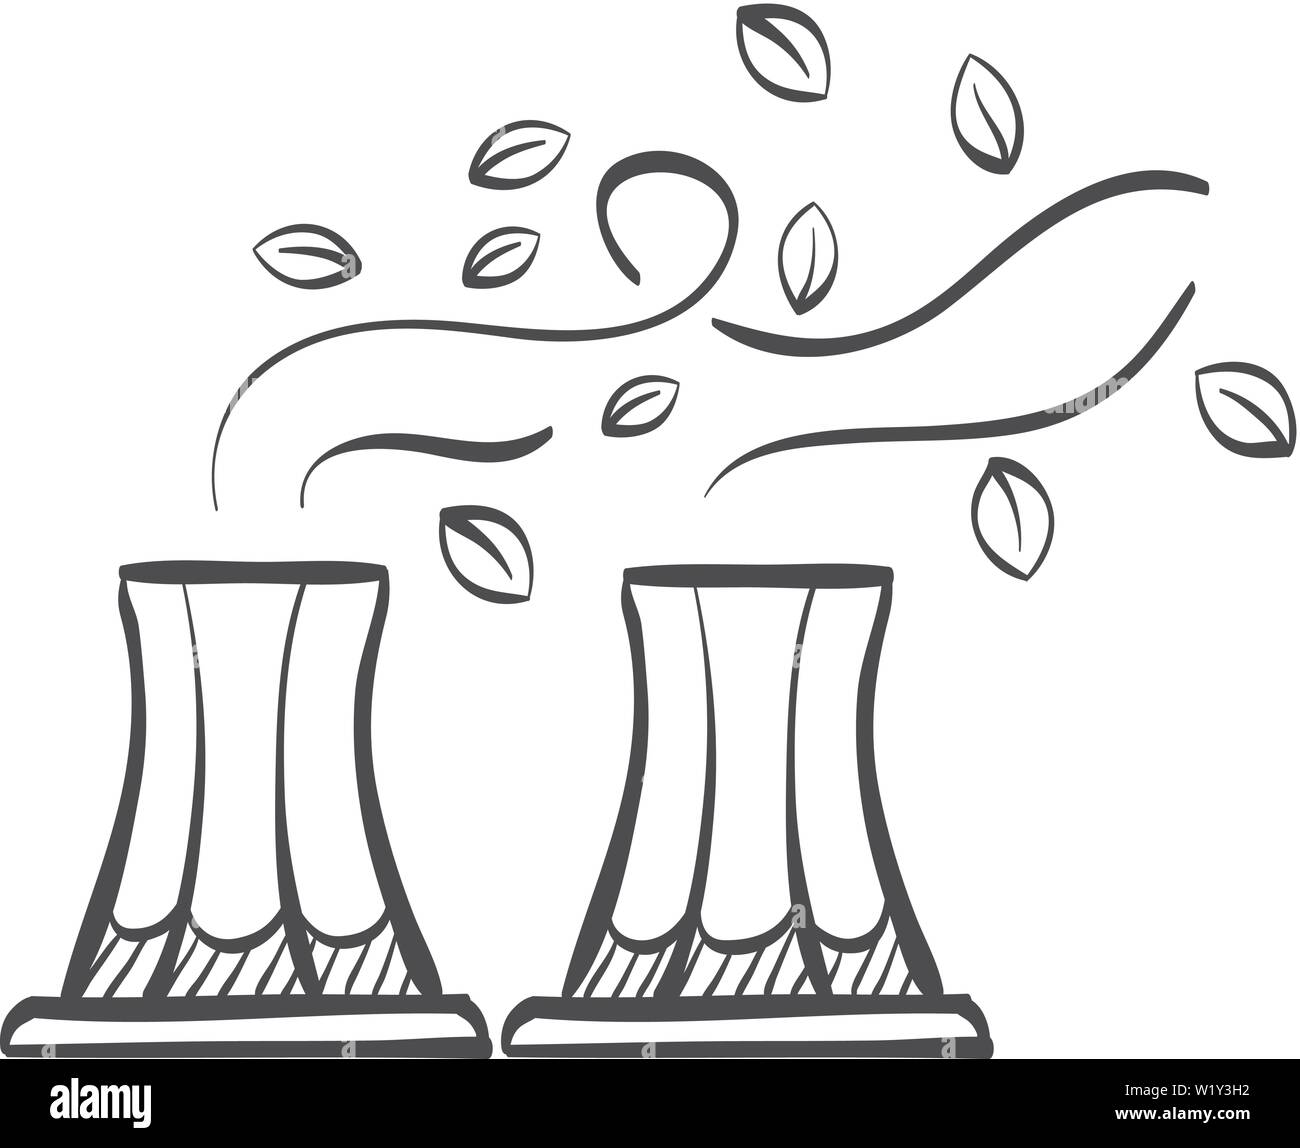 Nuclear plant with leaves icon in doodle sketch lines. Go green, environment friendly Stock Vector